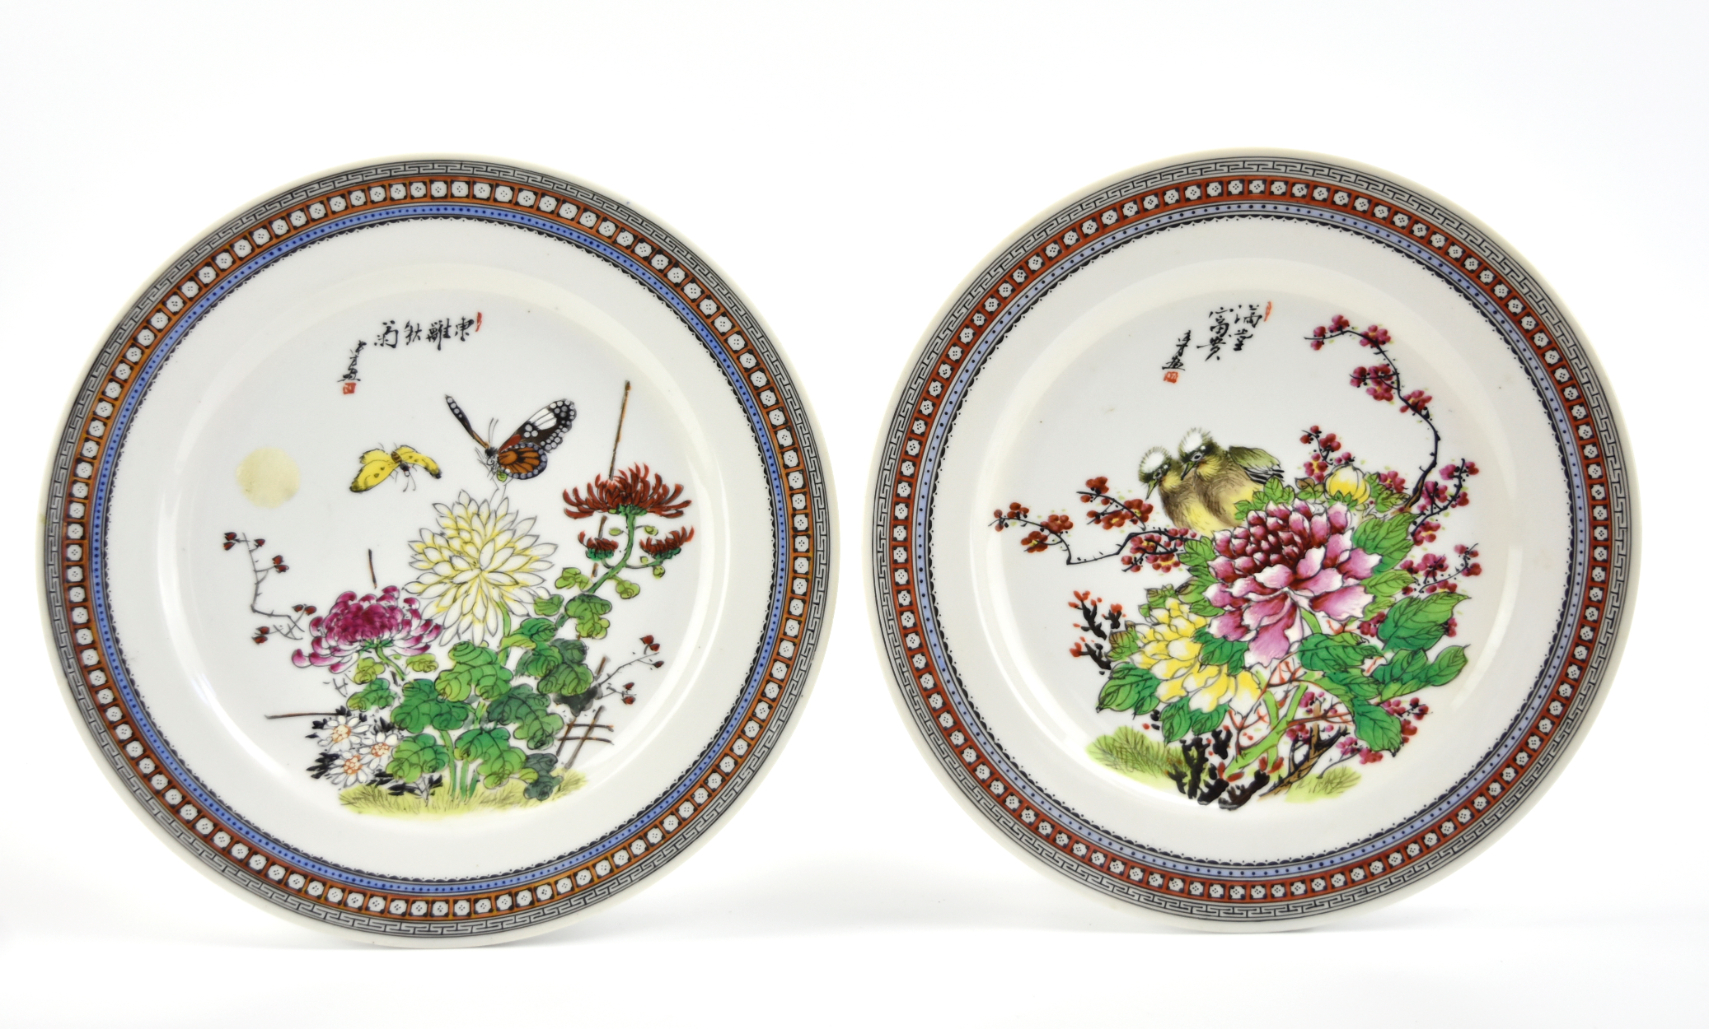 PAIR OF CHINESE FAMILLE ROSE PLATES,